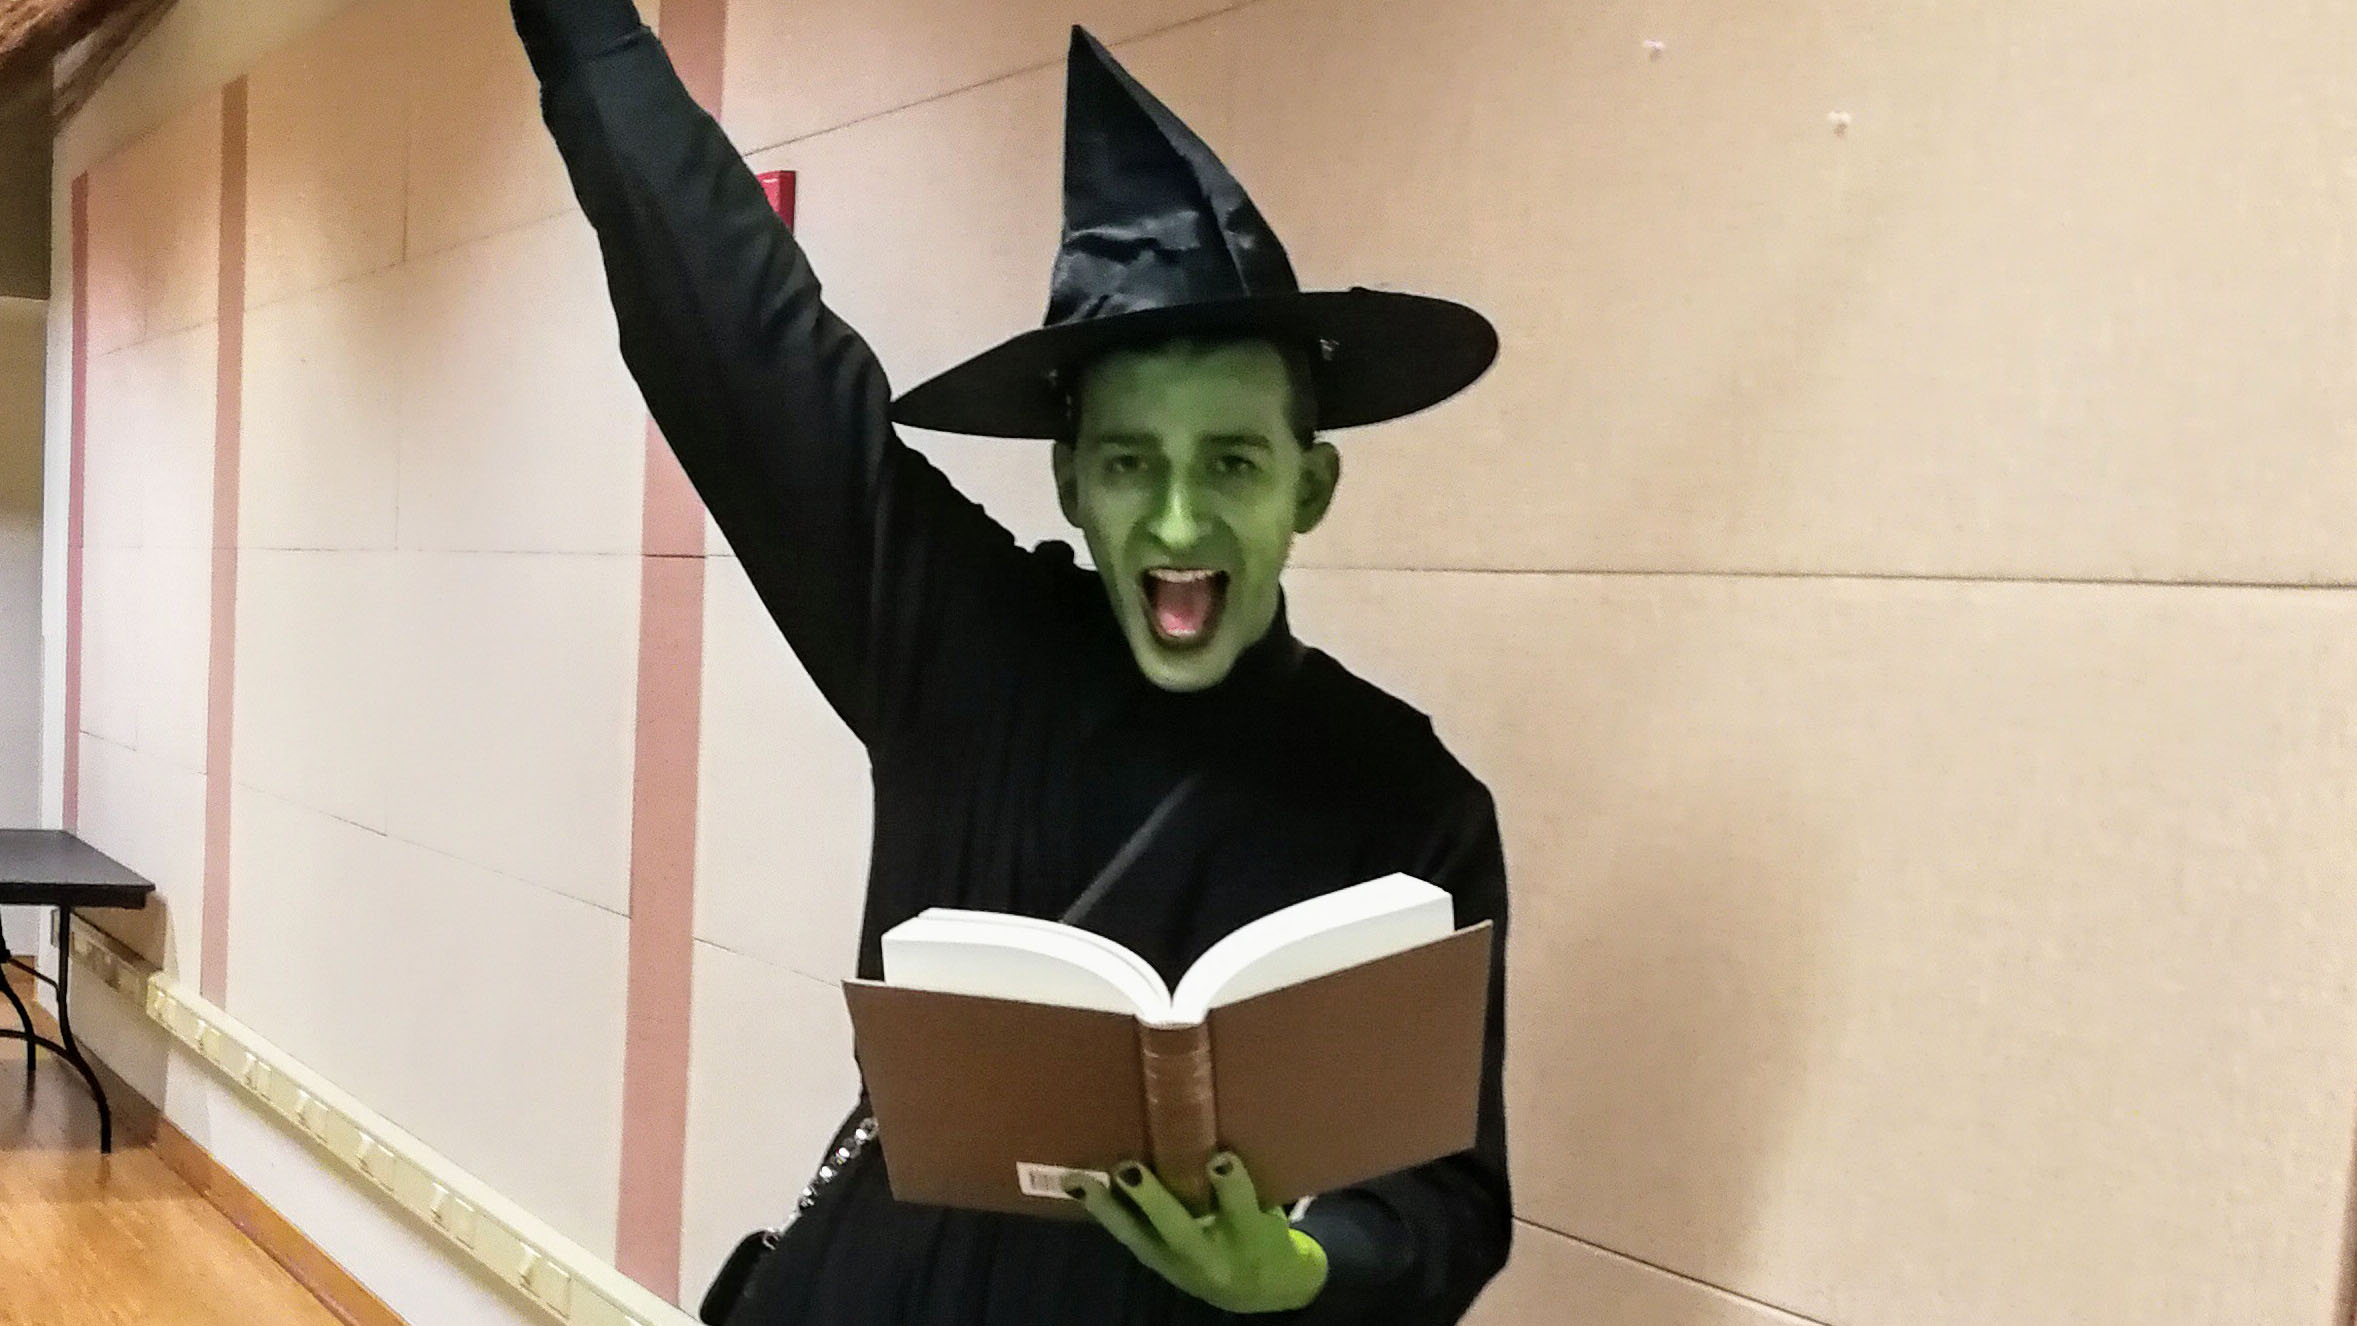 Thumbnail of Elphaba chanting a spell from a book.